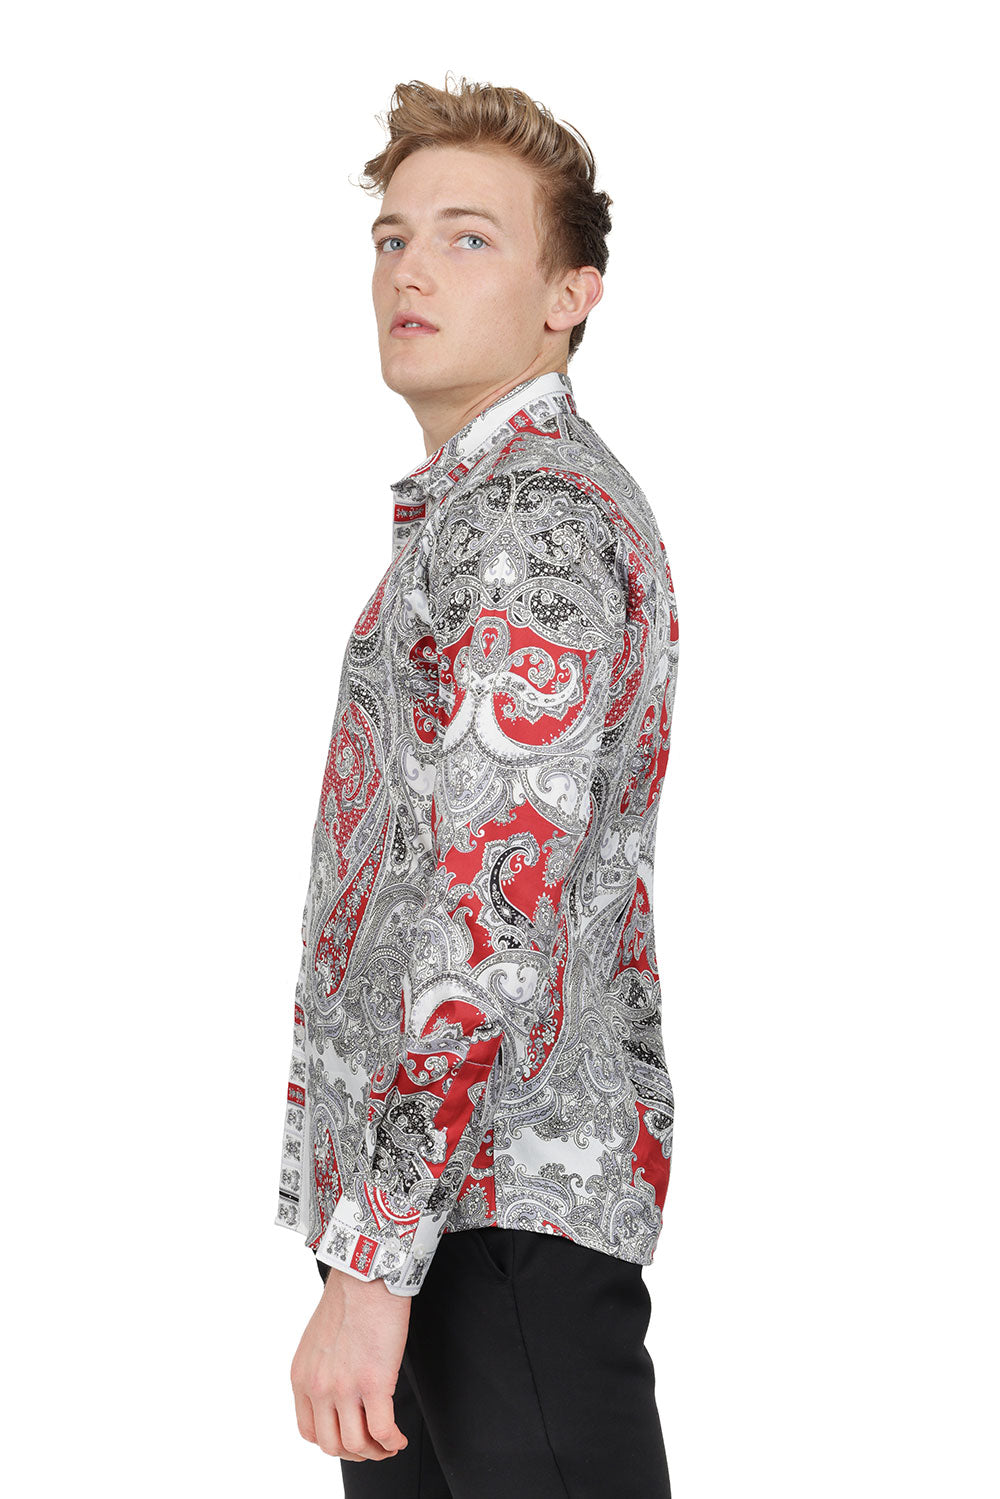 Barabas Men's Paisley Luxury Printed Button Down Dress Shirt SP10 red